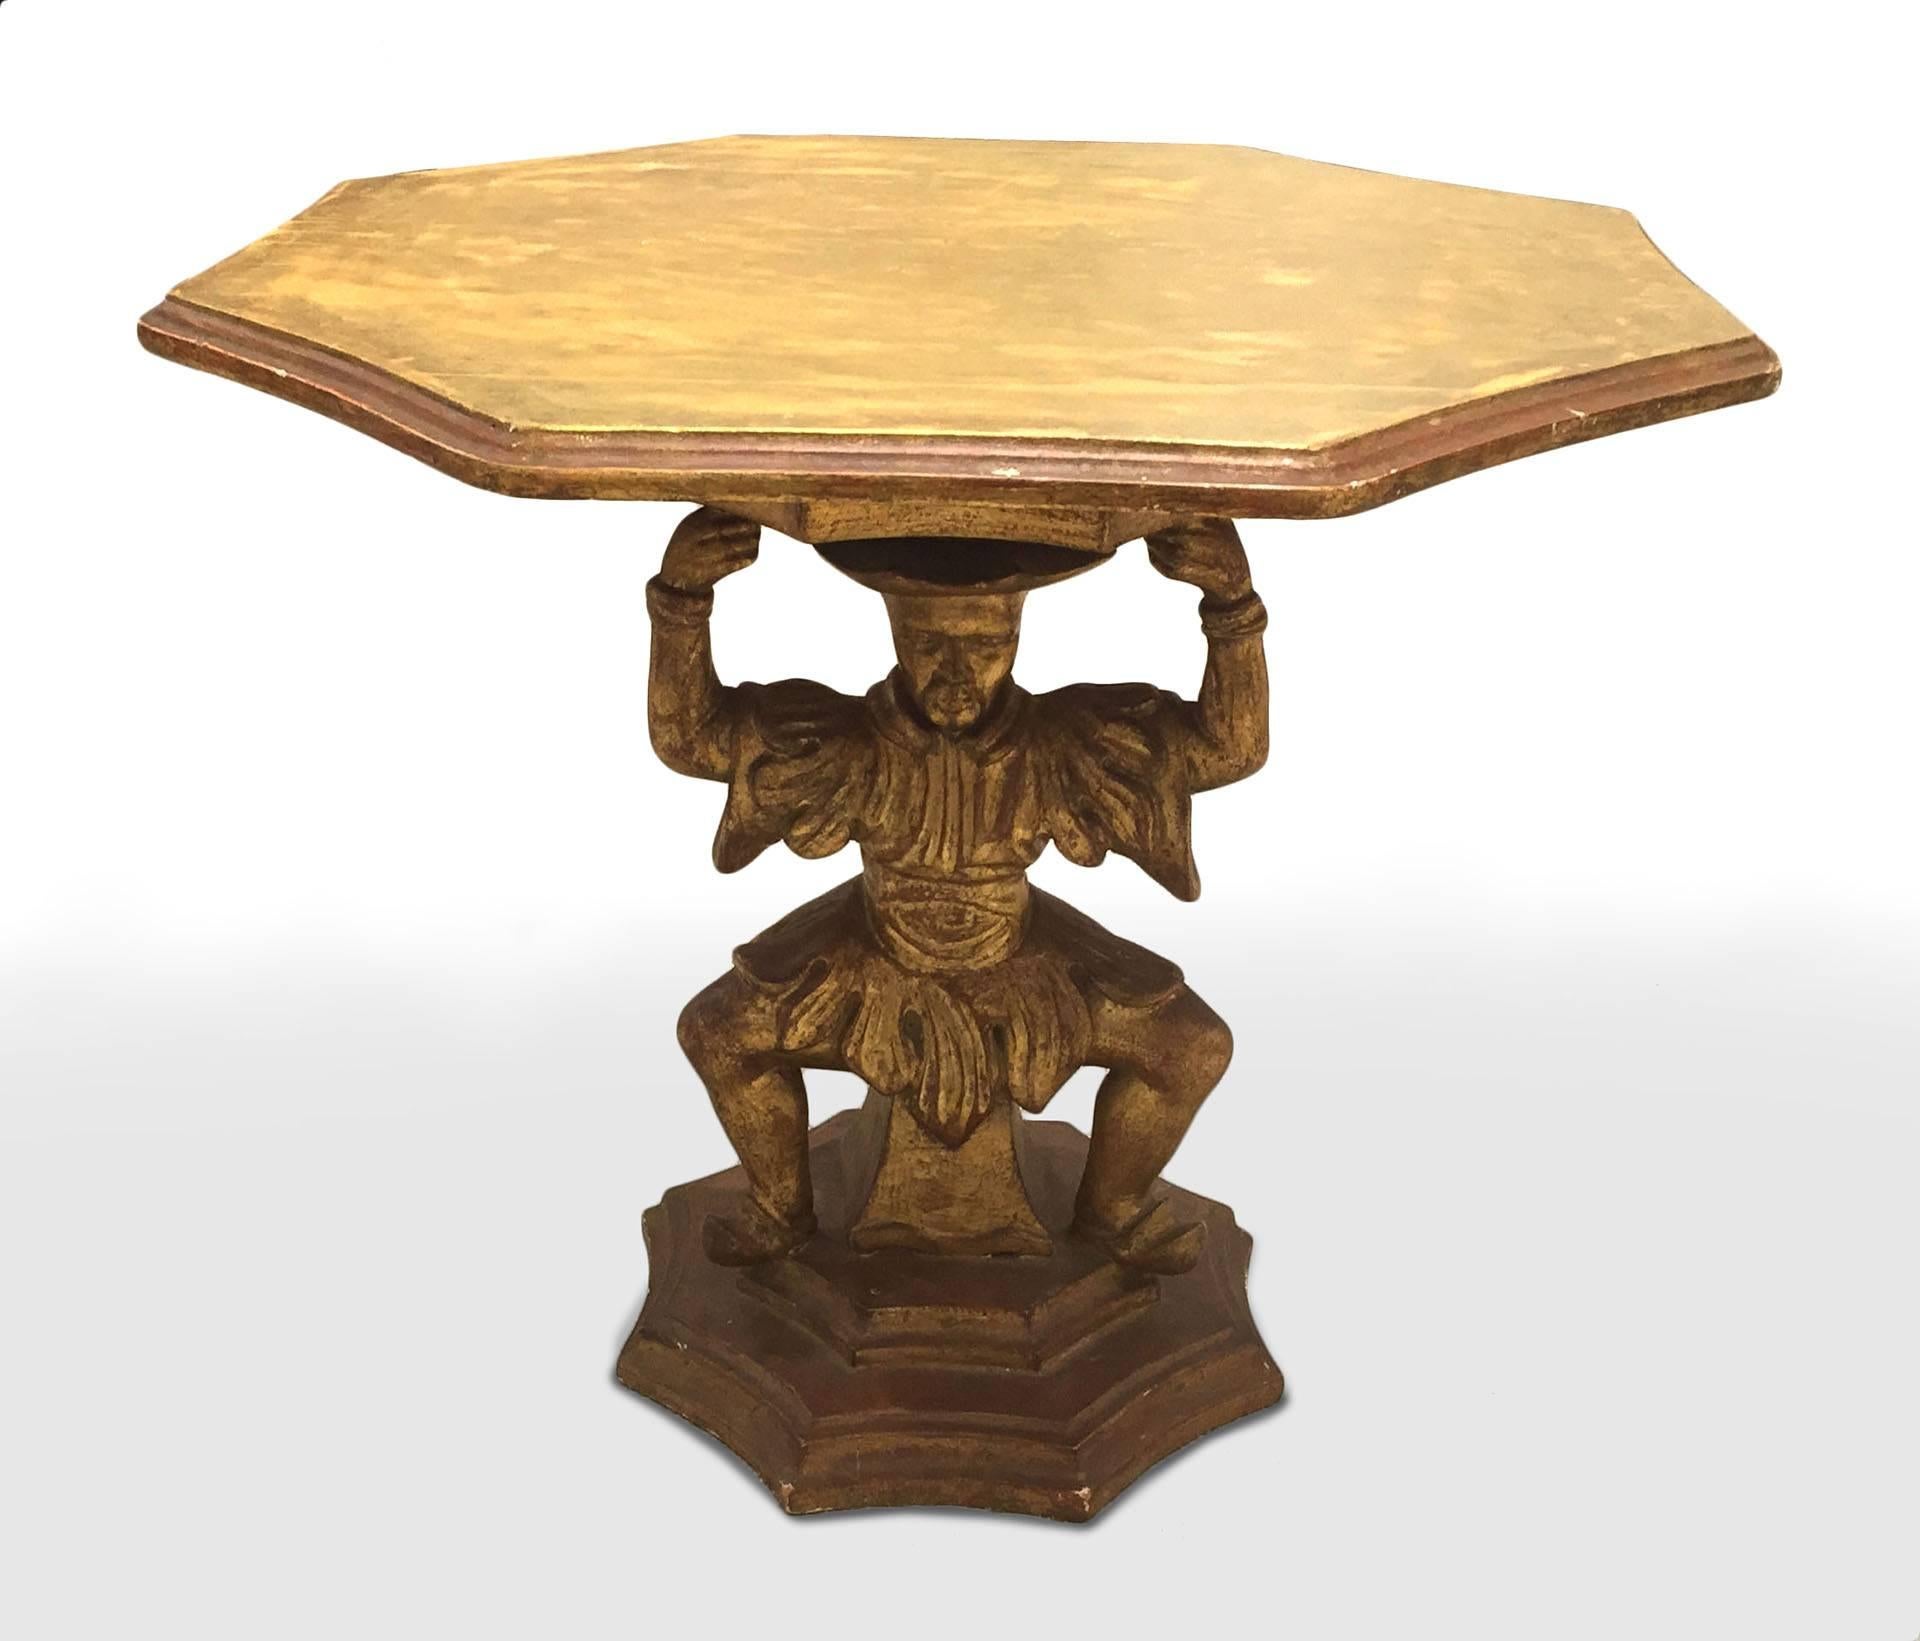 Pair of Italian 1950s carved giltwood low end tables with an octagonal top supported by a stylized Chinese figure contemporary midcentury.
     